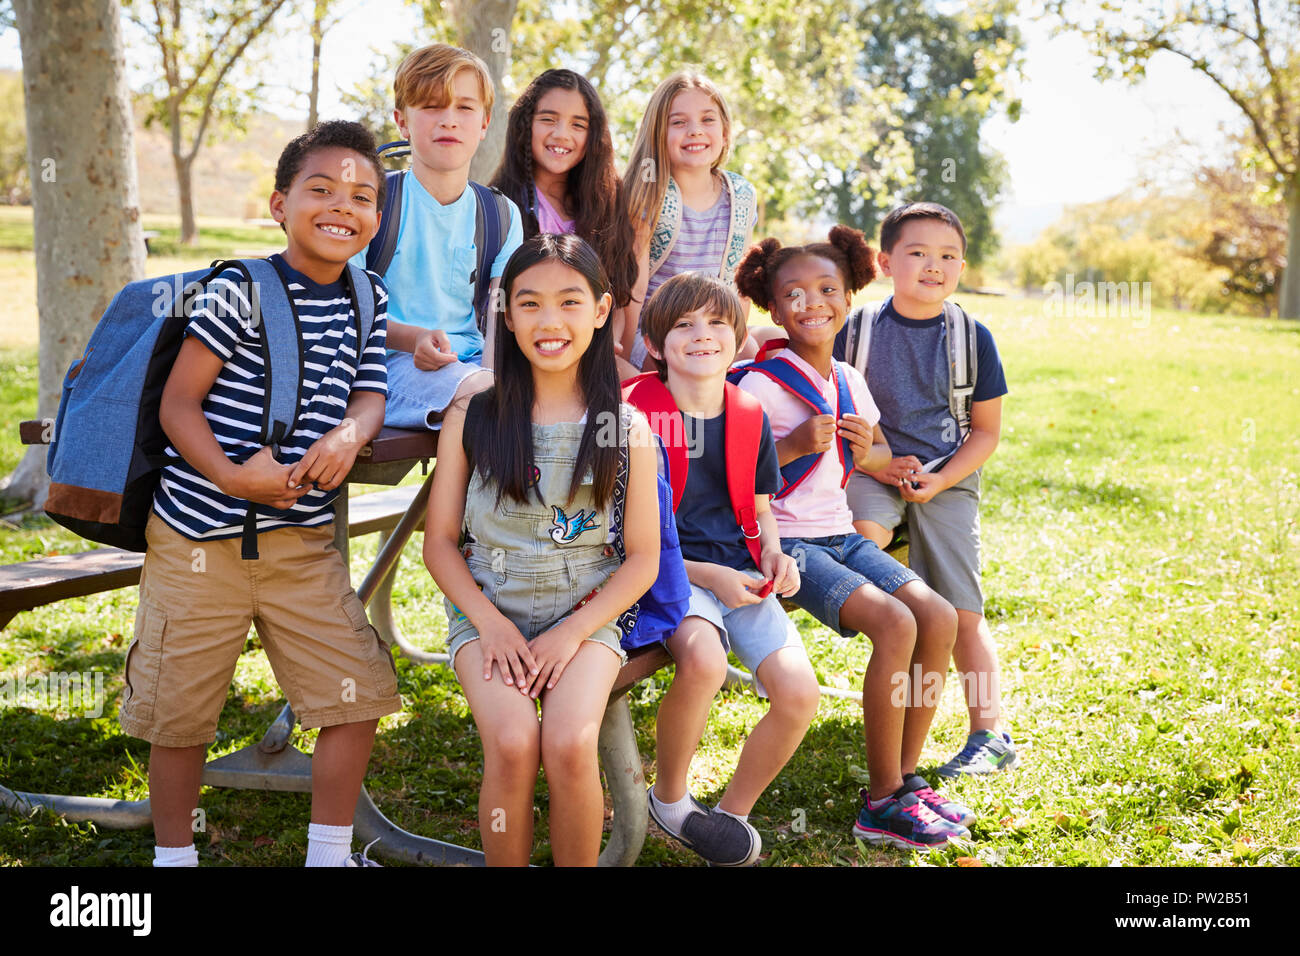 Multi-ethnic group of school kids hanging out on school trip Stock Photo